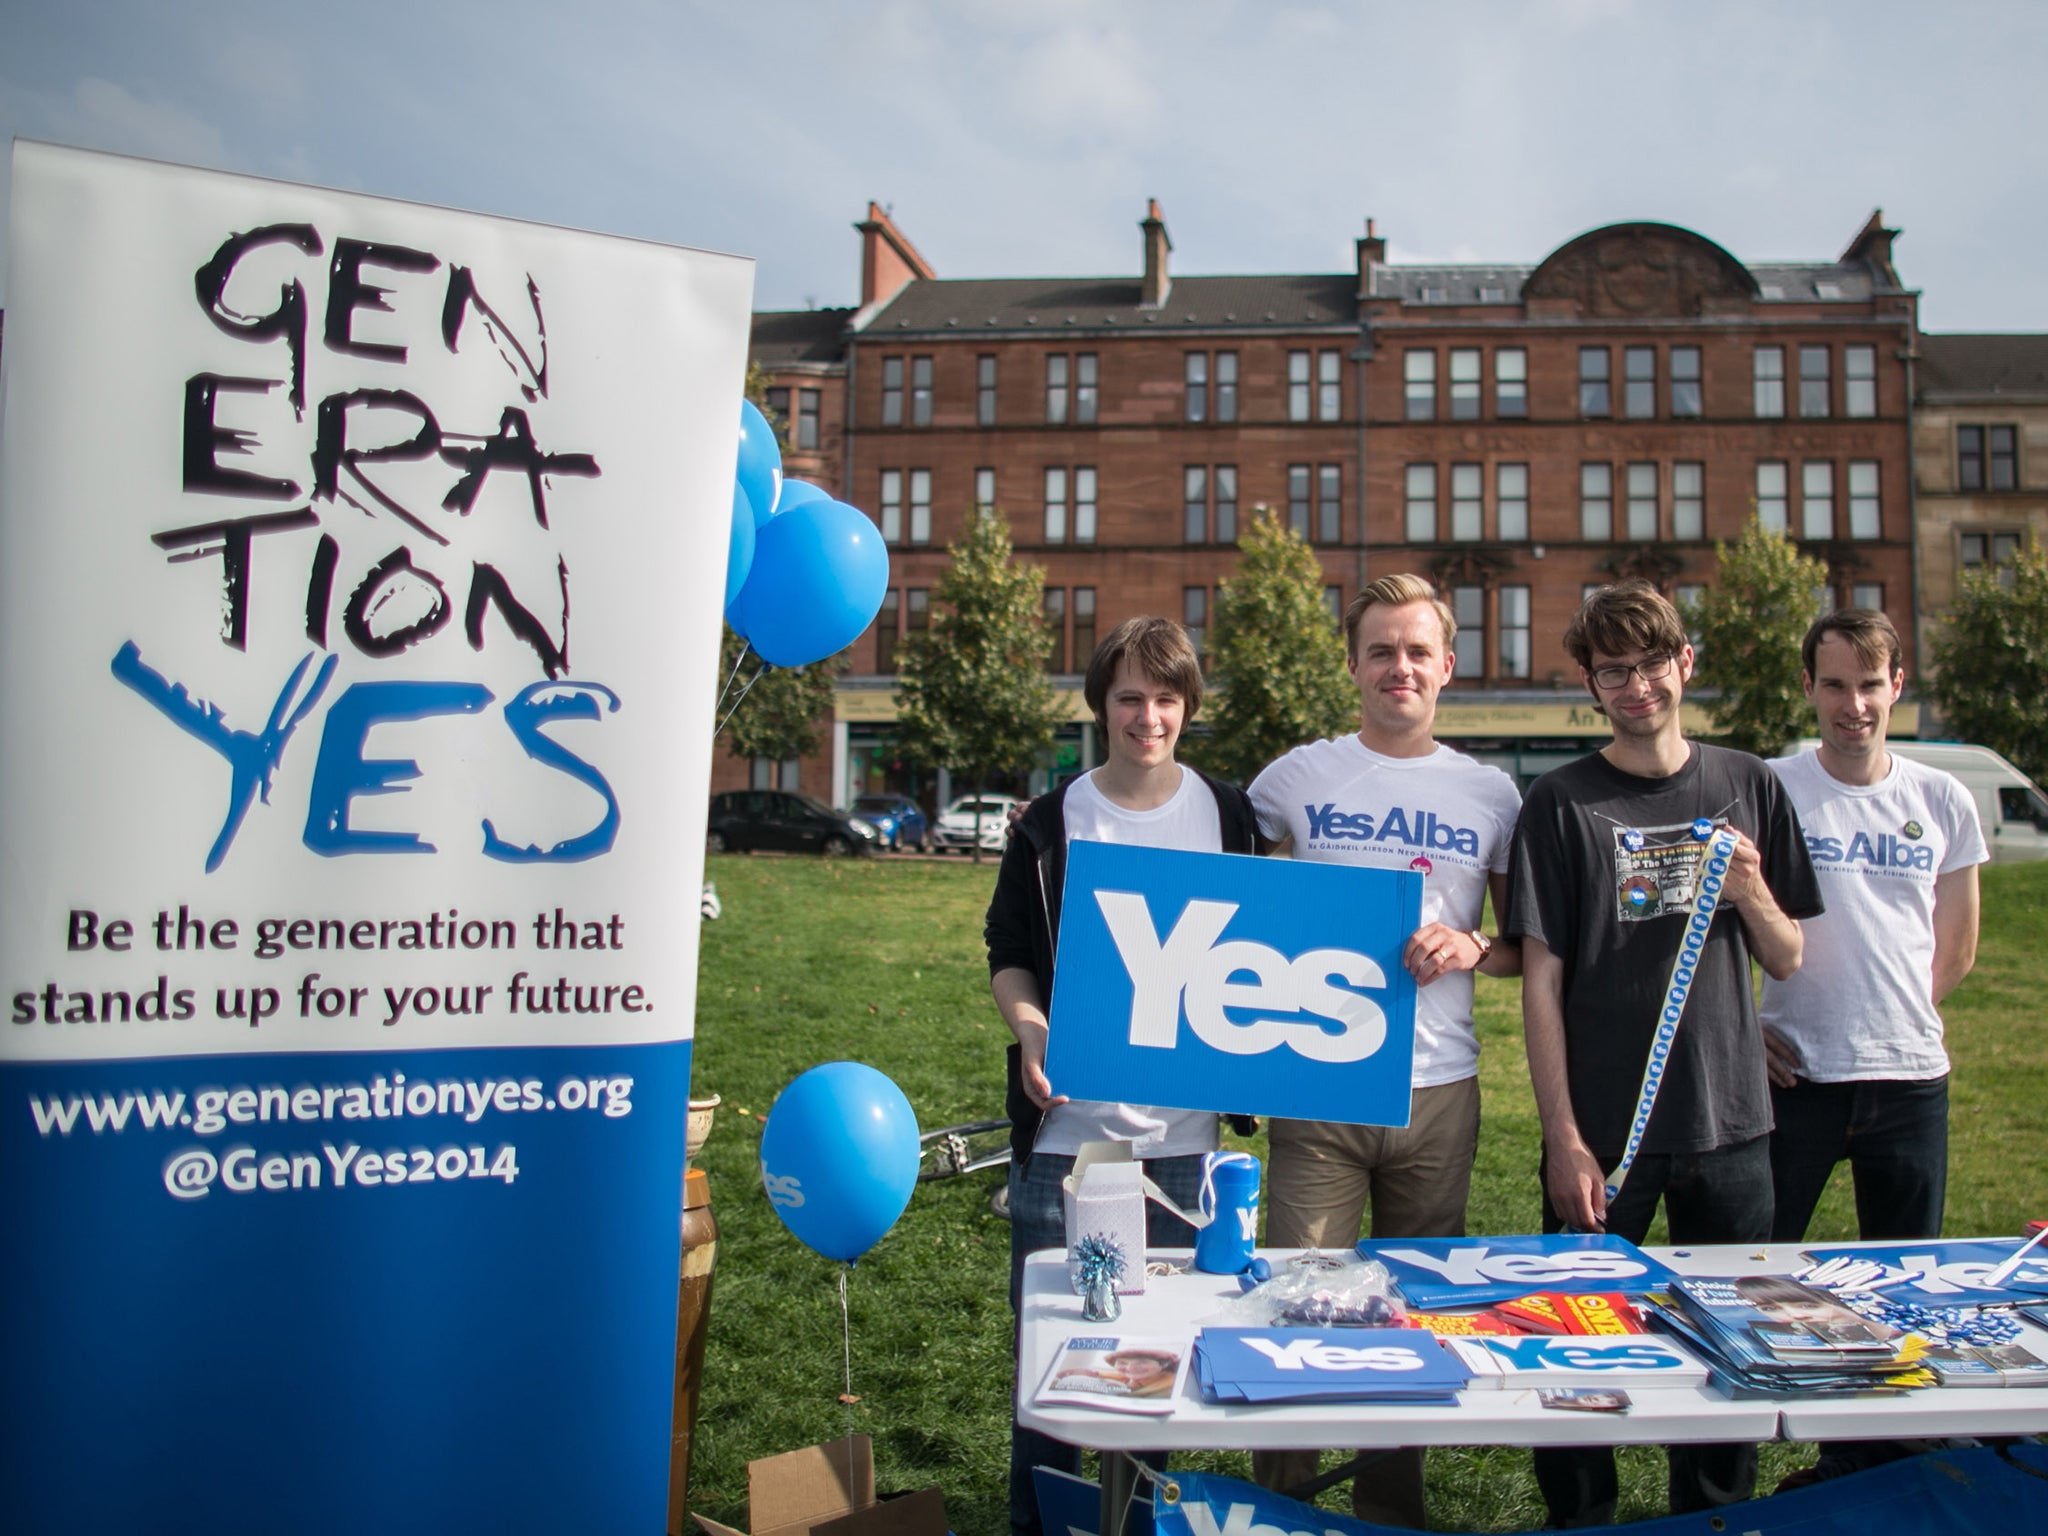 Members of Generation Yes - a youth and students campaigning for a Yes vote in Scotland's independence referendum last year. Labour and Liberal Democrat peers want the voting age lowered to 16 in time for the EU referendum